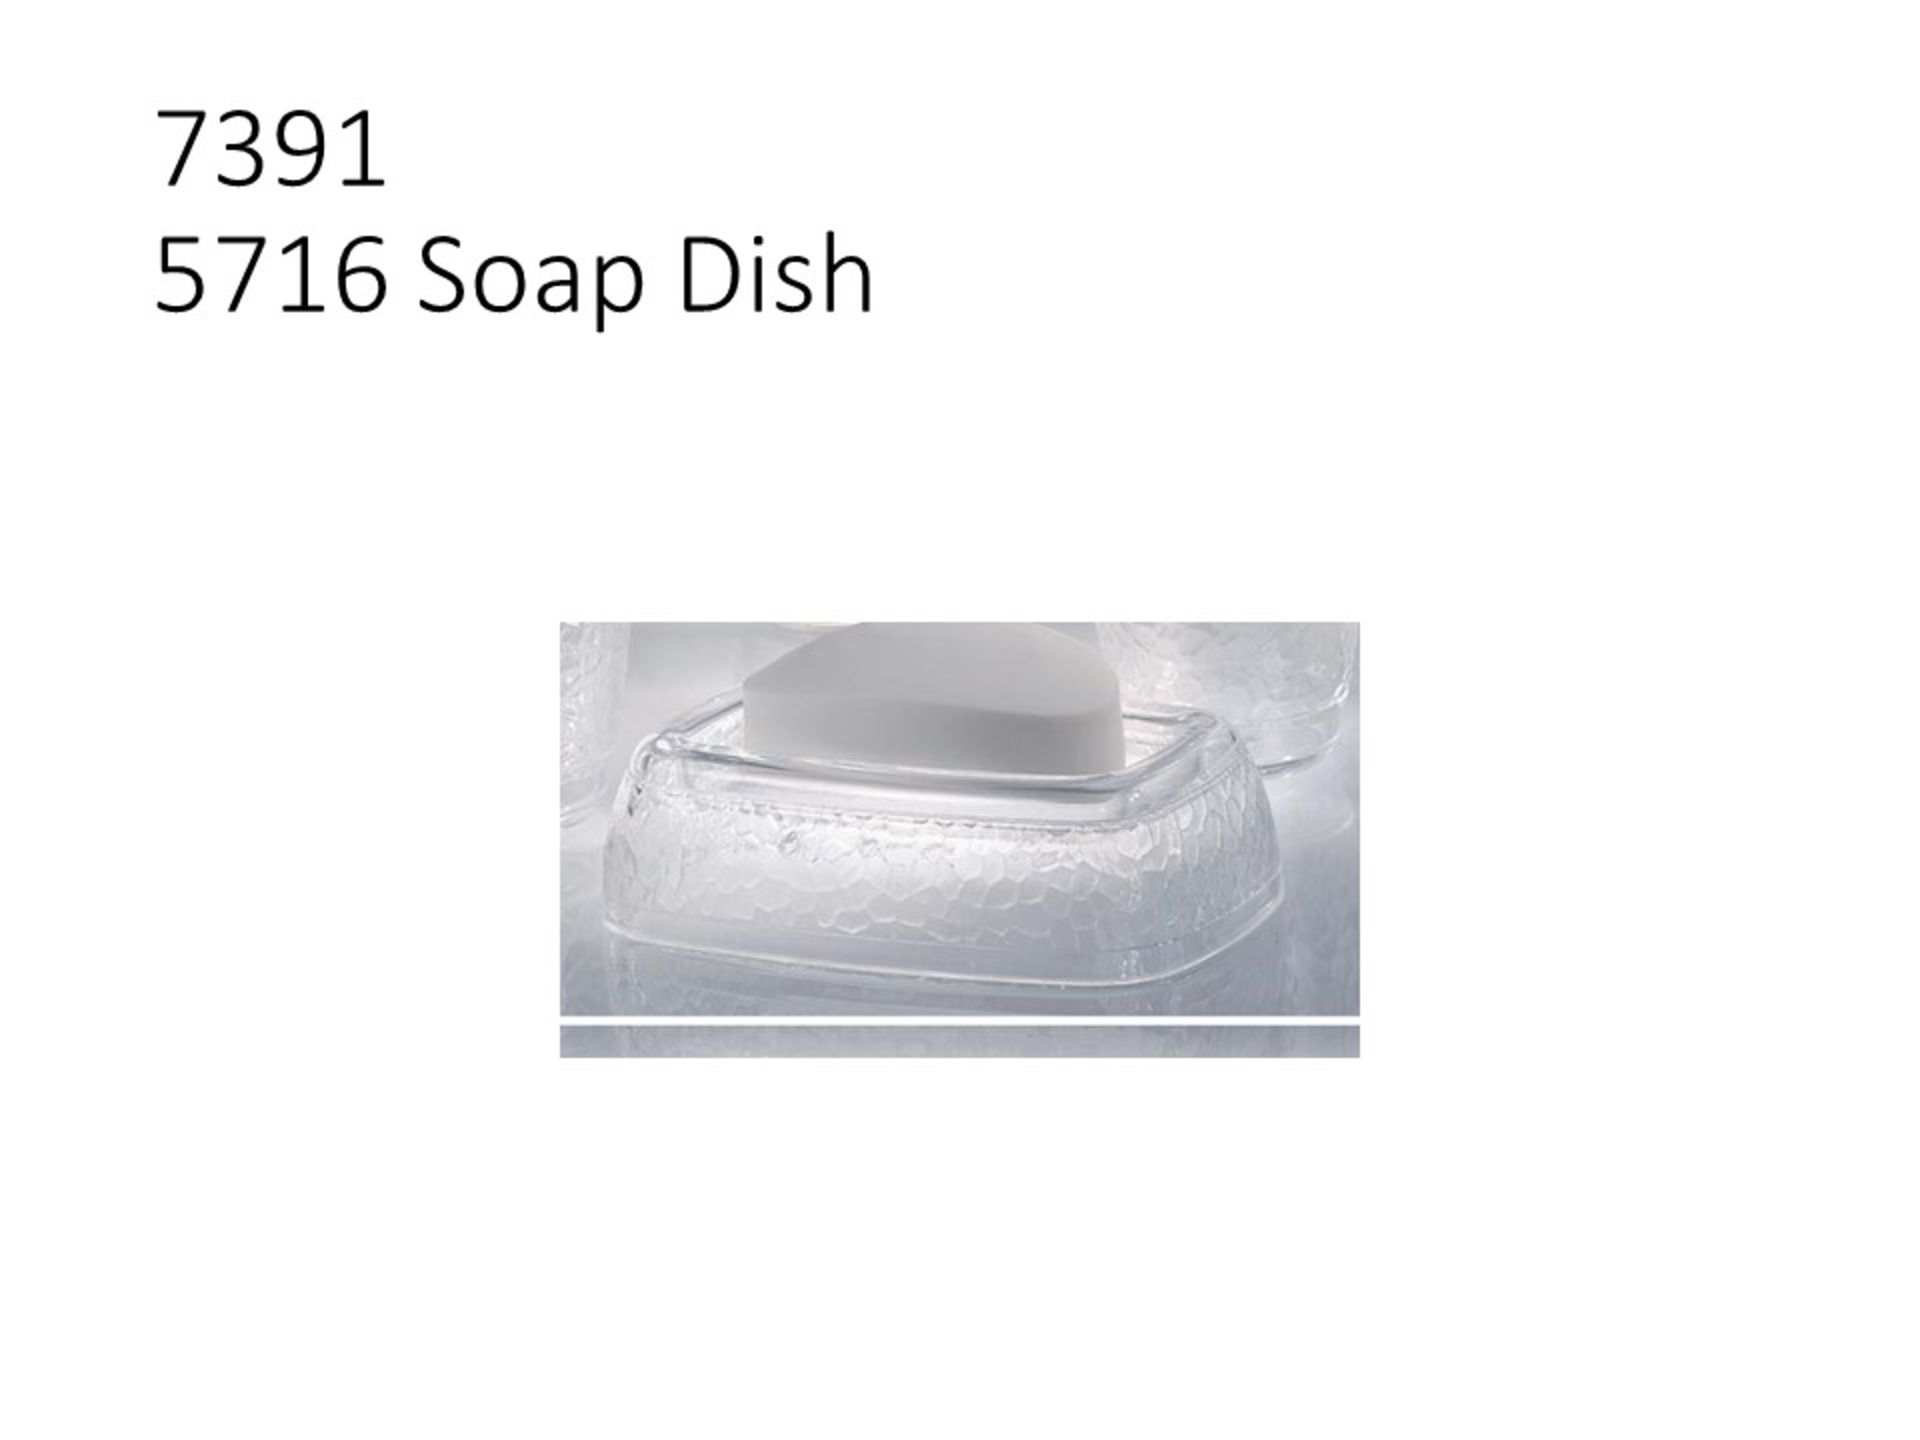 PLASTIC INJECTION MOLD - 5716 Soap Dish